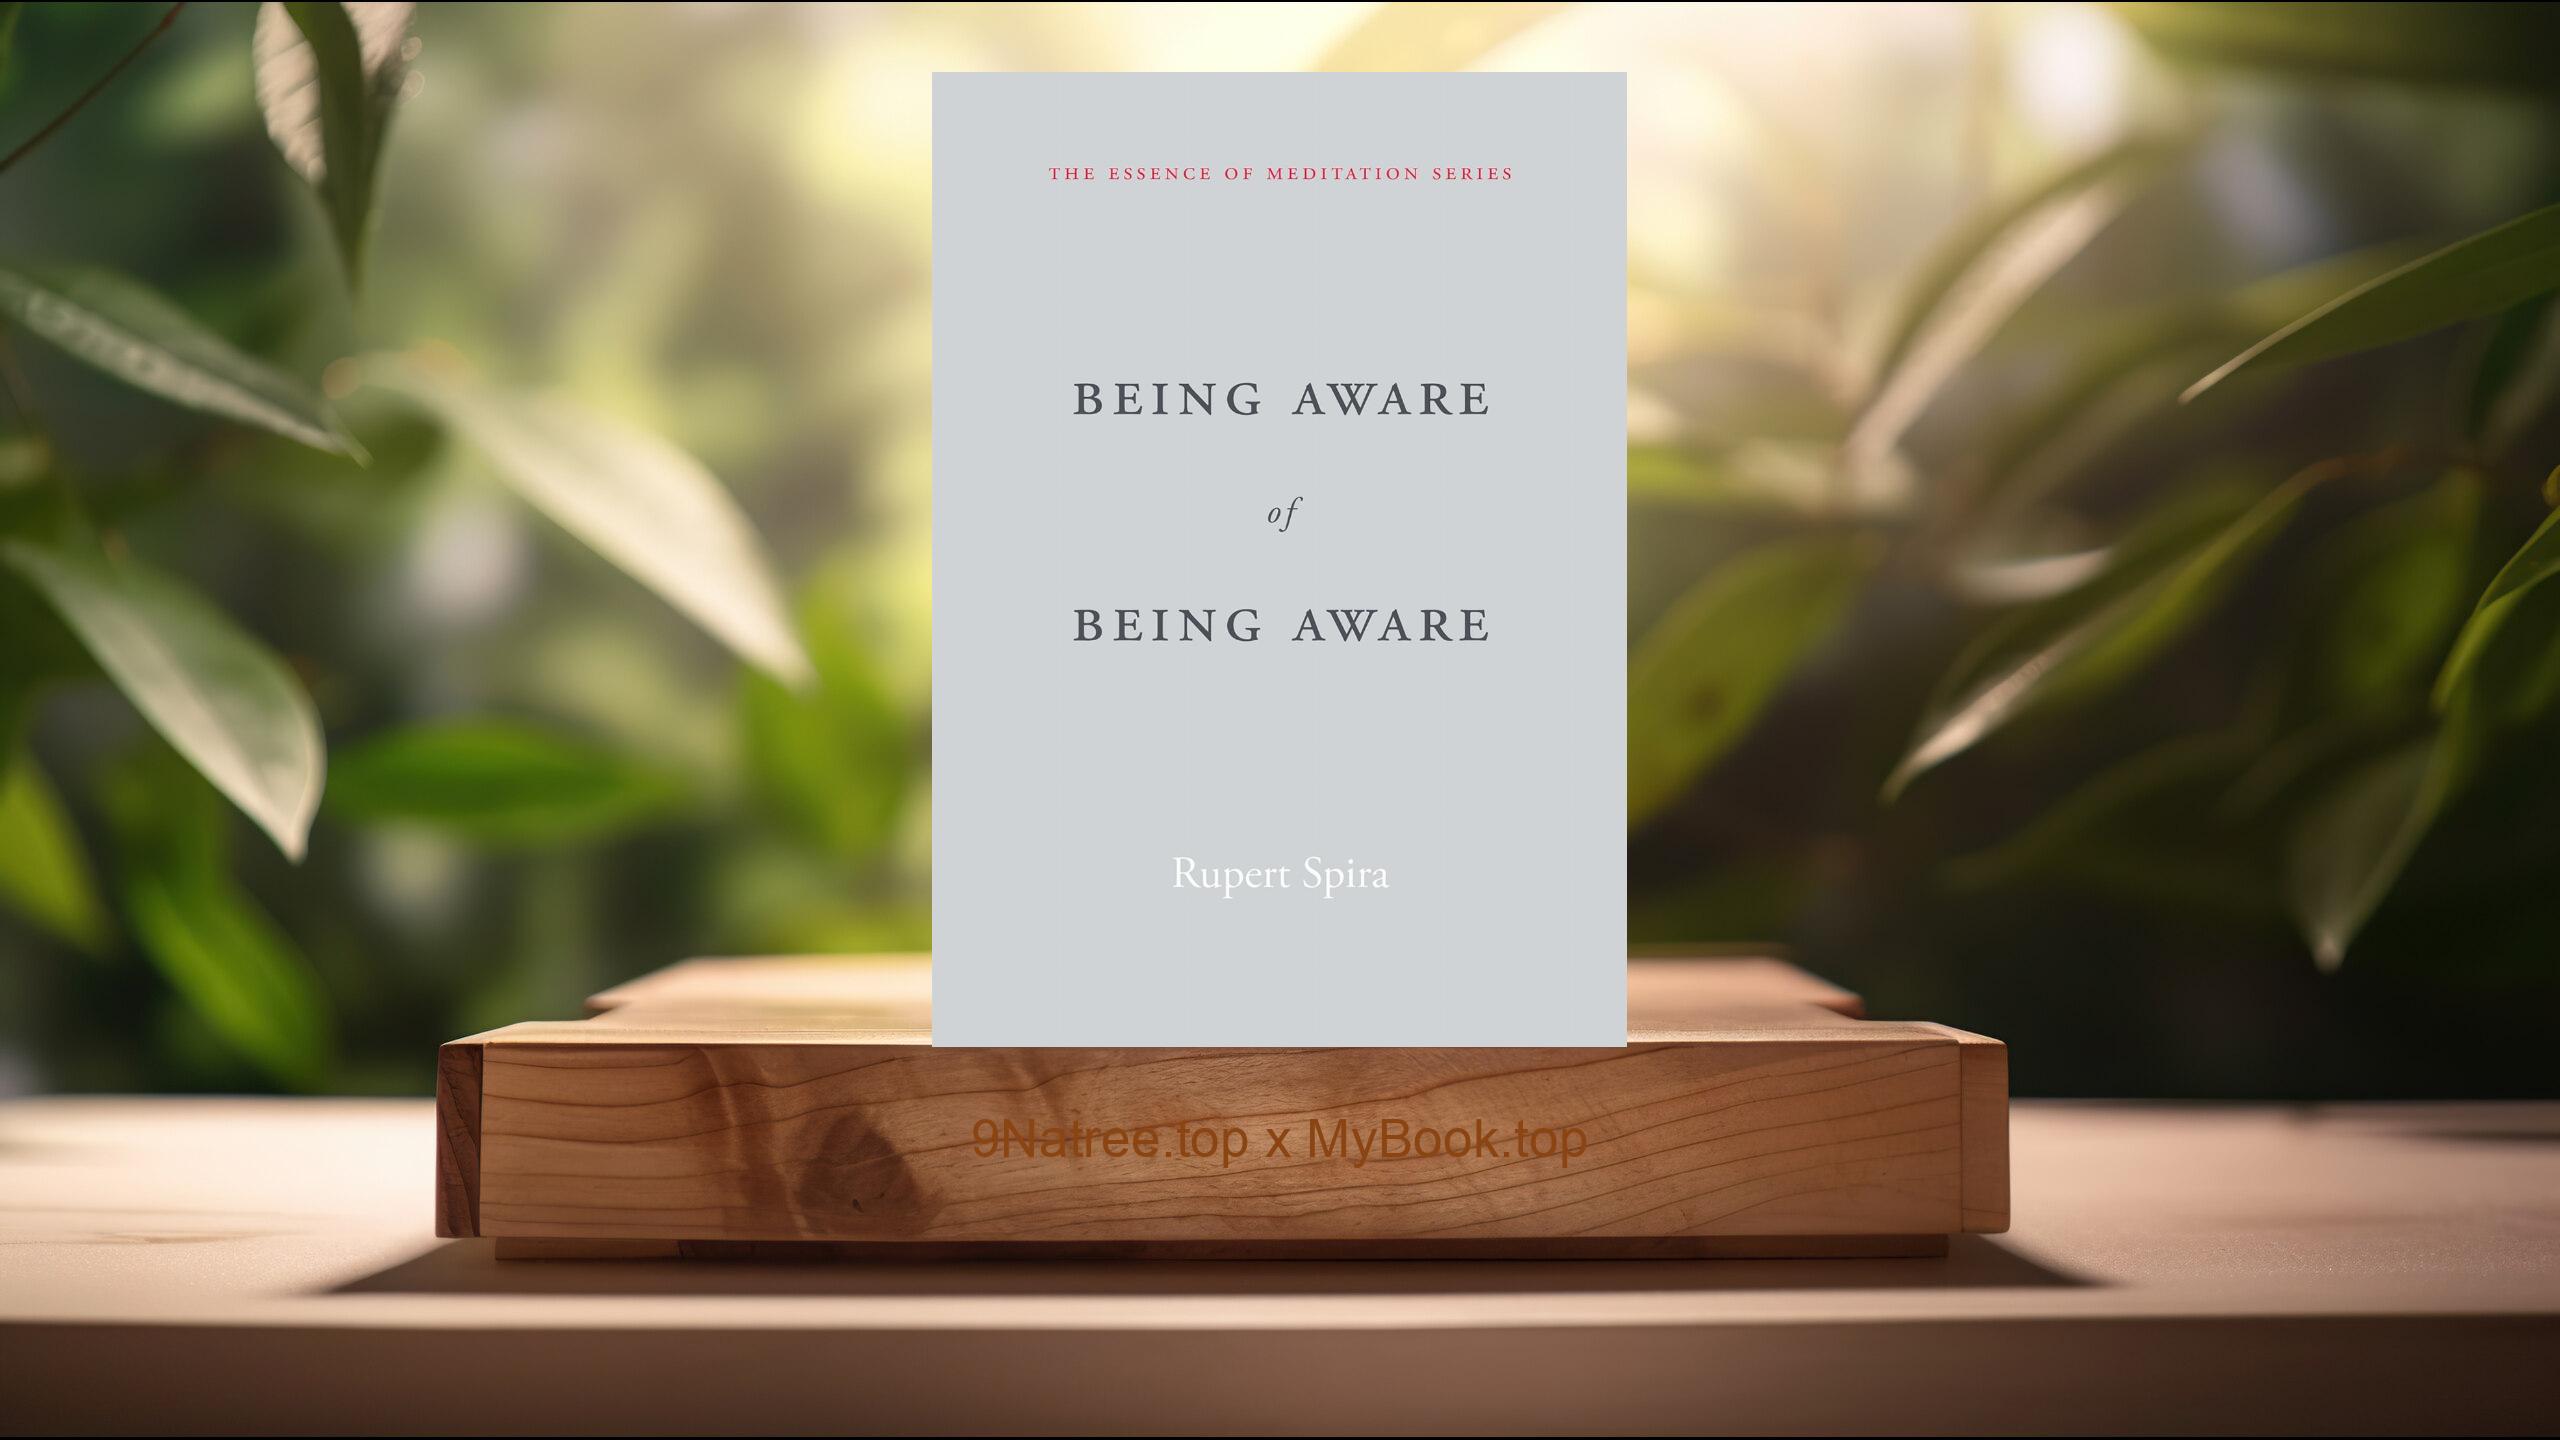 [Review] Being Aware of Being Aware (The Essence of Meditation Series) (Rupert Spira) Summarized